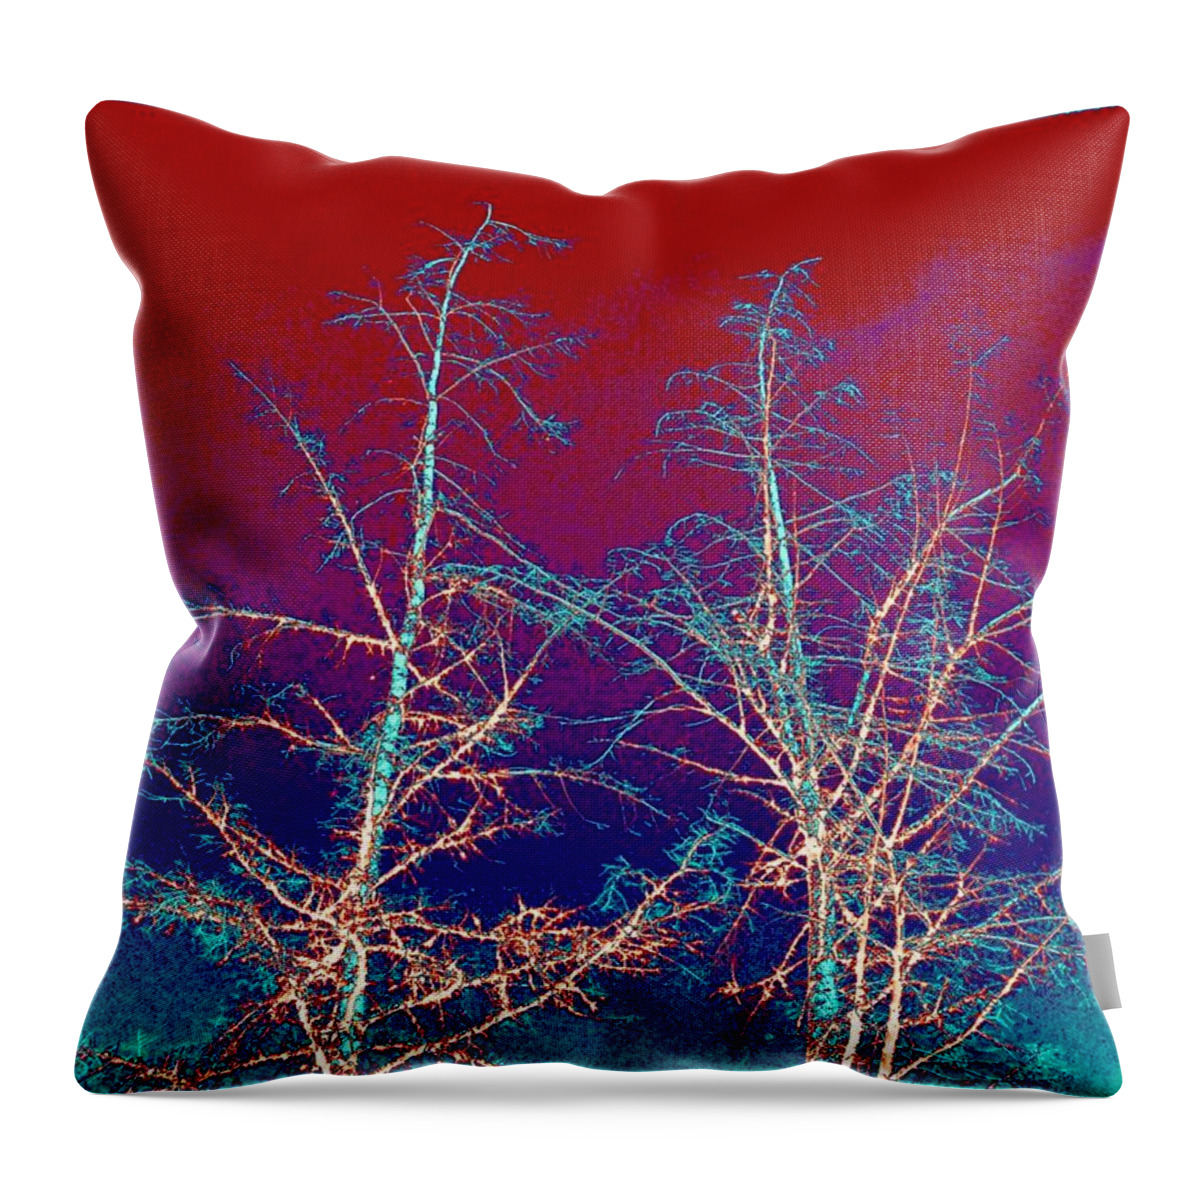 Abstract Throw Pillow featuring the digital art Treetops 4 by Will Borden